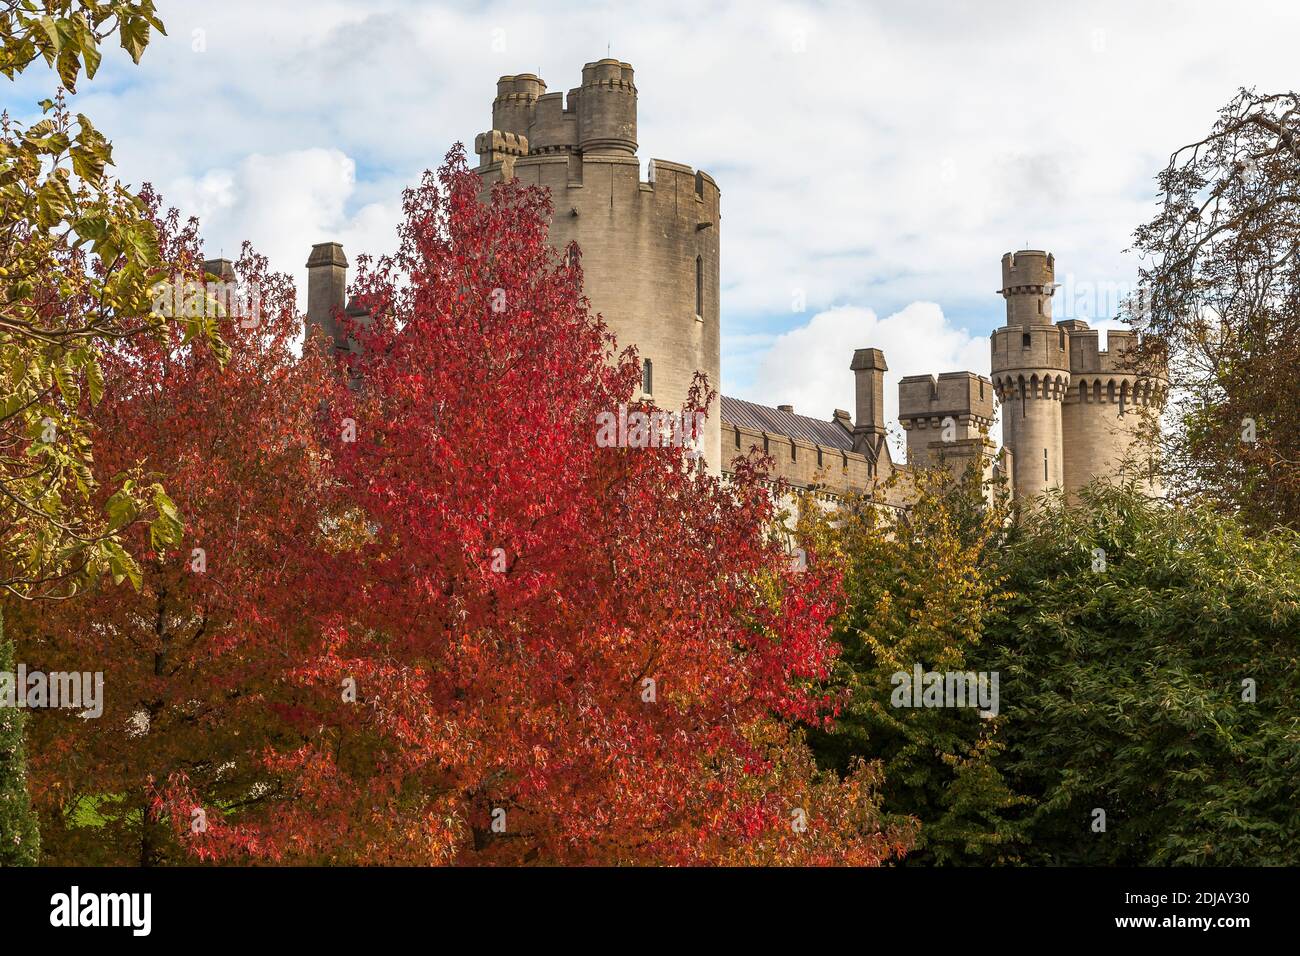 Arundel Castle towers, from the Castle gardens, Arundel, West Sussex, England, UK: Autumn colour on American sweetgum (Liquidambar styraciflua) in the Stock Photo